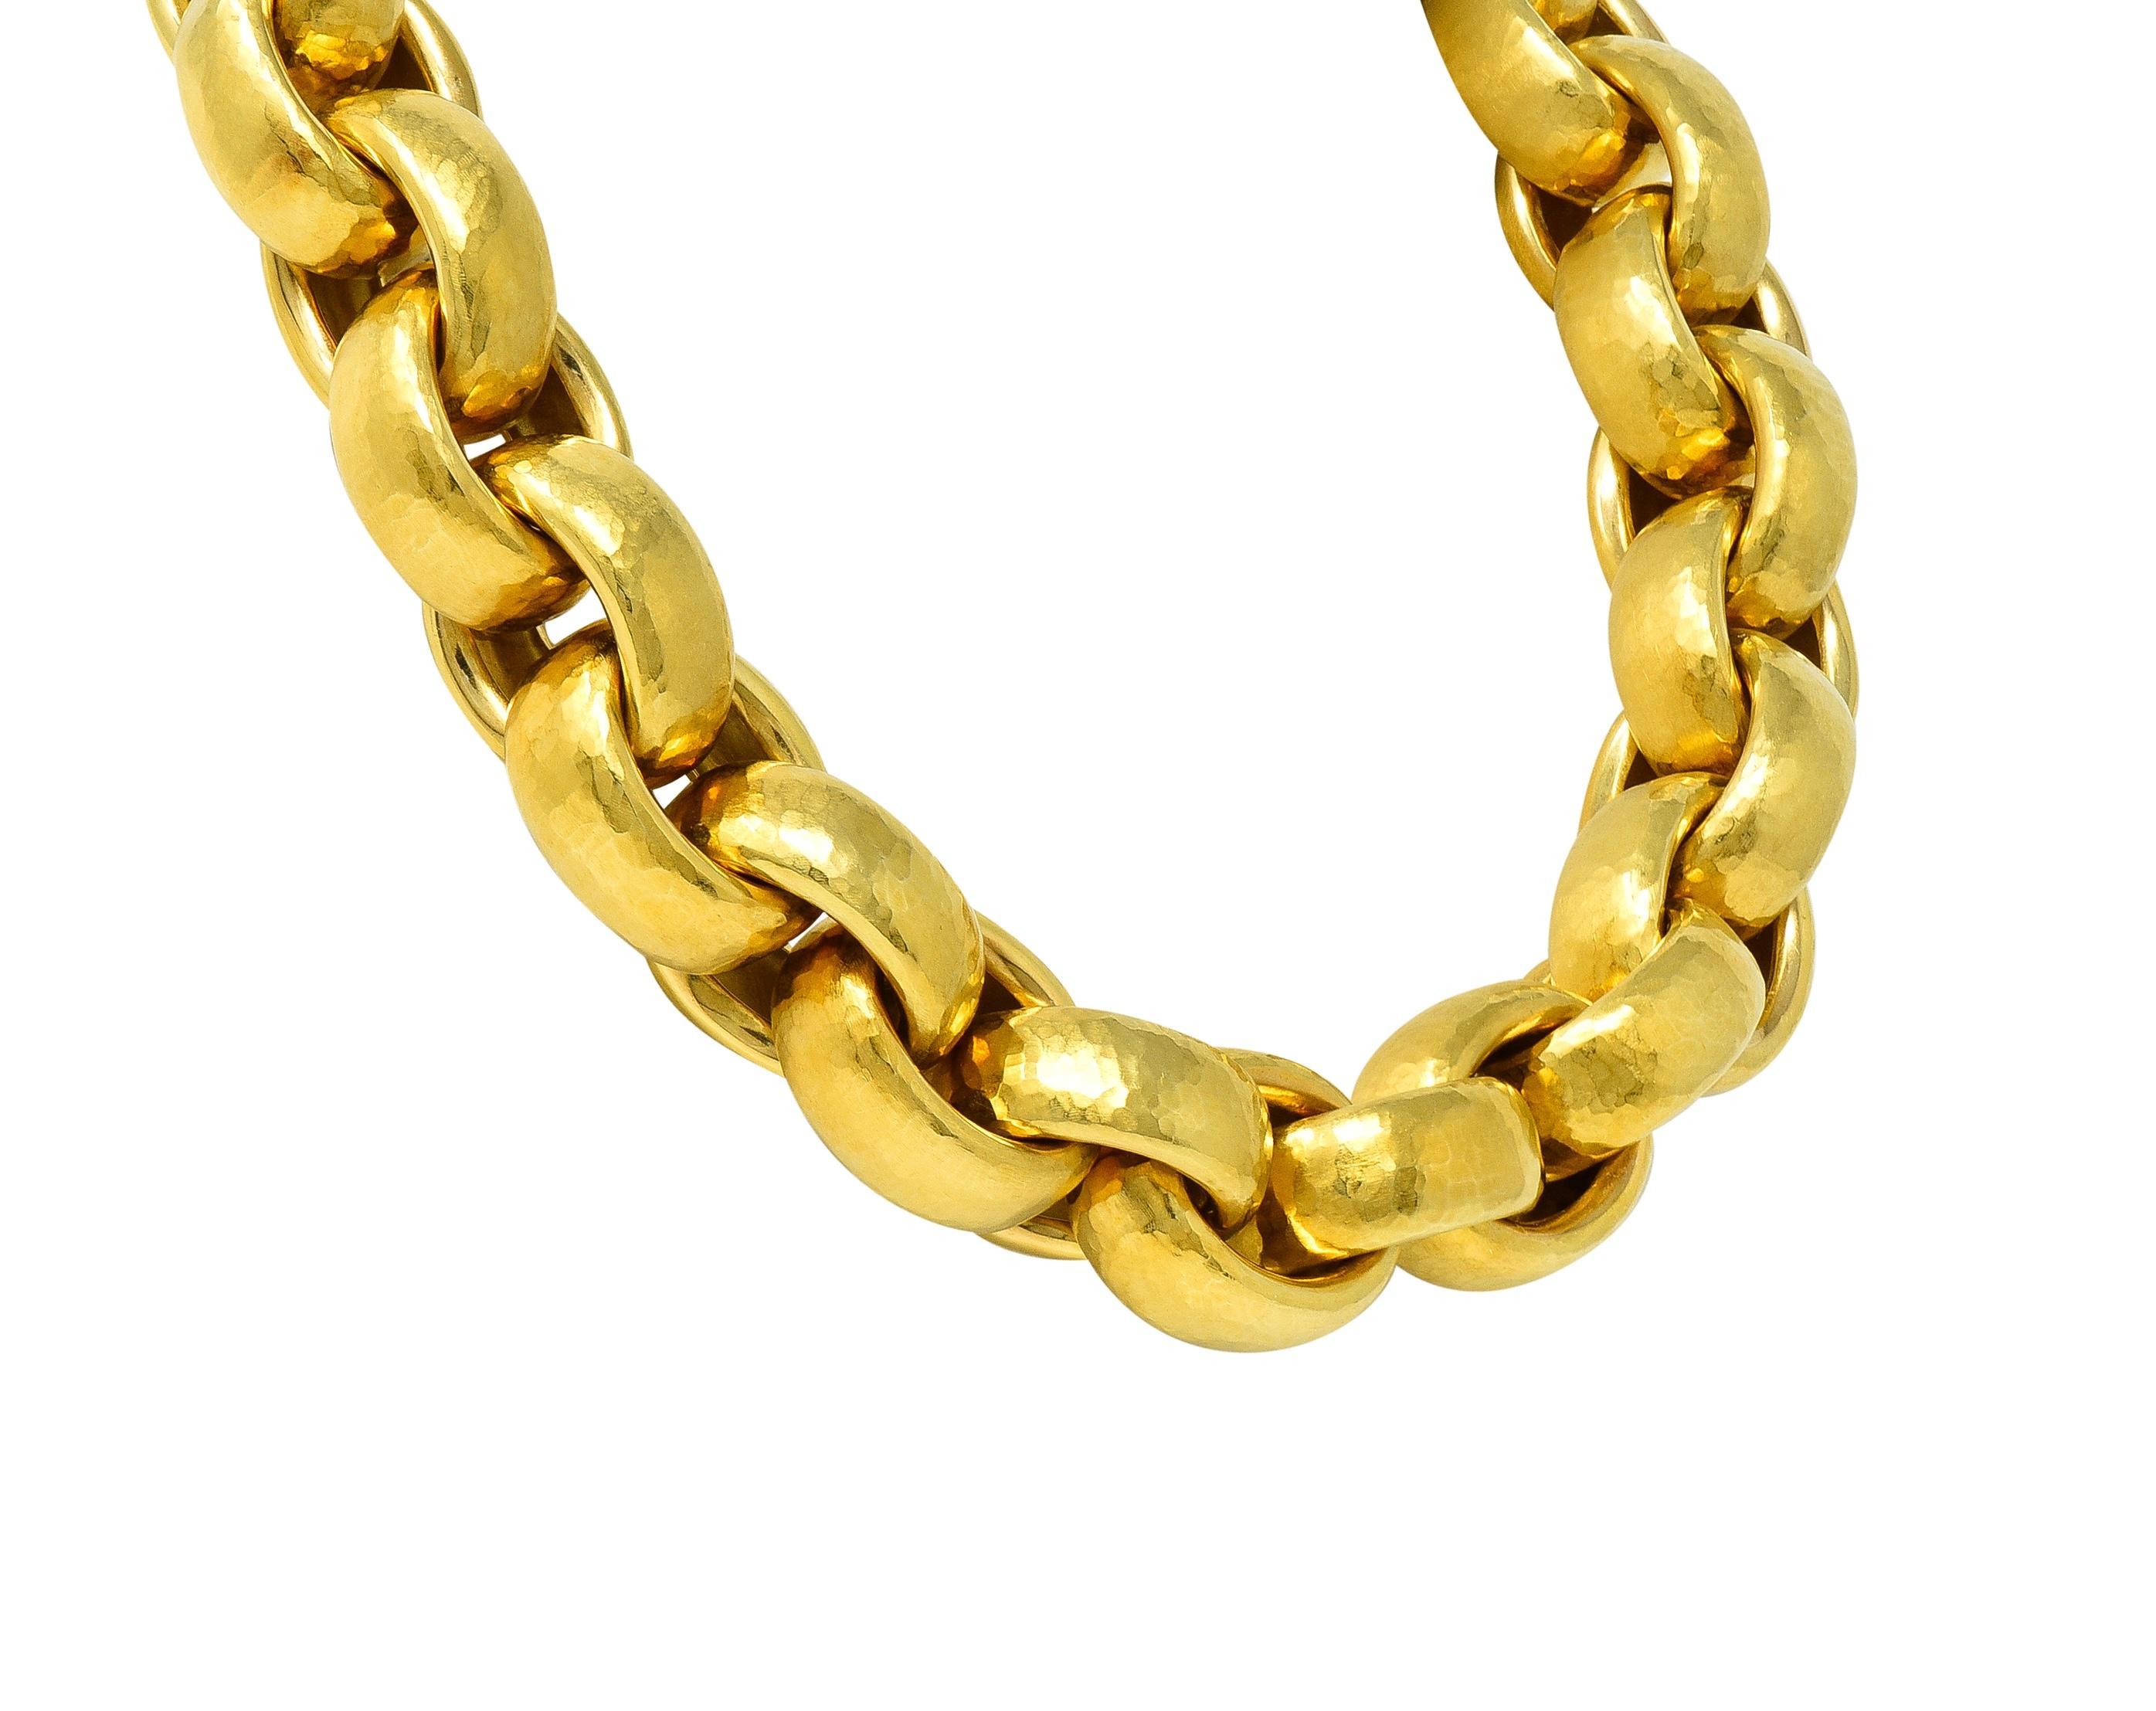 1989 Paloma Picasso Tiffany & Co. 18 Karat Yellow Gold Hammered Link Necklace In Excellent Condition For Sale In Philadelphia, PA